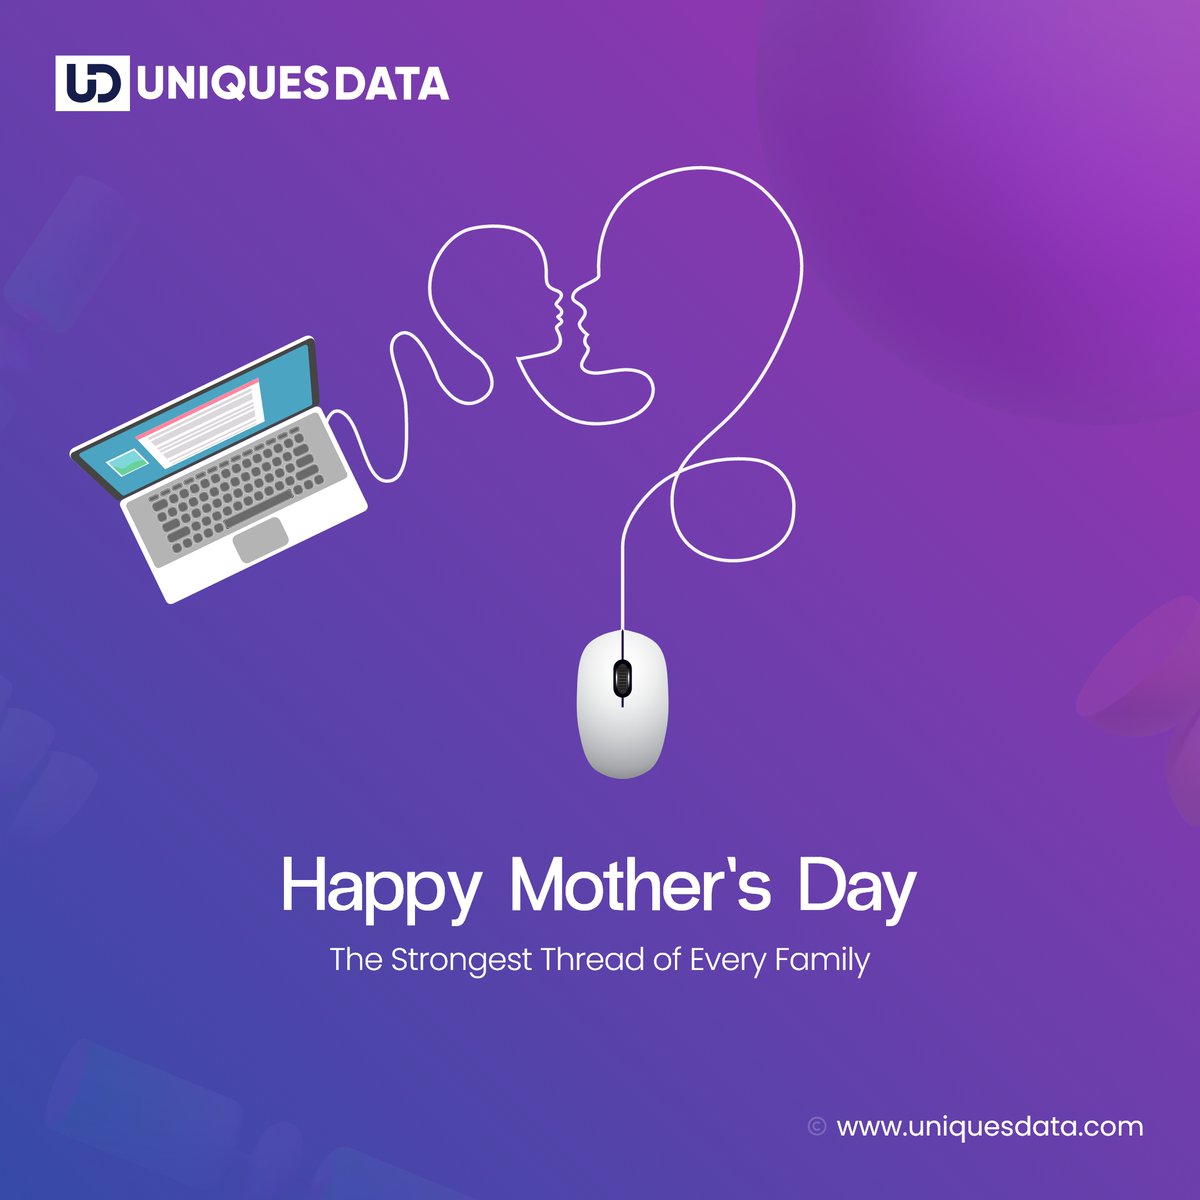 On the occasion of mothers day, Uniquesdata spread kindest of wishes to every mother and appreciate the efforts done by her.👩‍👦

#mothersday #mothersdaygift #love #happymothersday #mom #mother #family #motherhood #momlife #mothers #uniquesdata #dataentry #datascraping